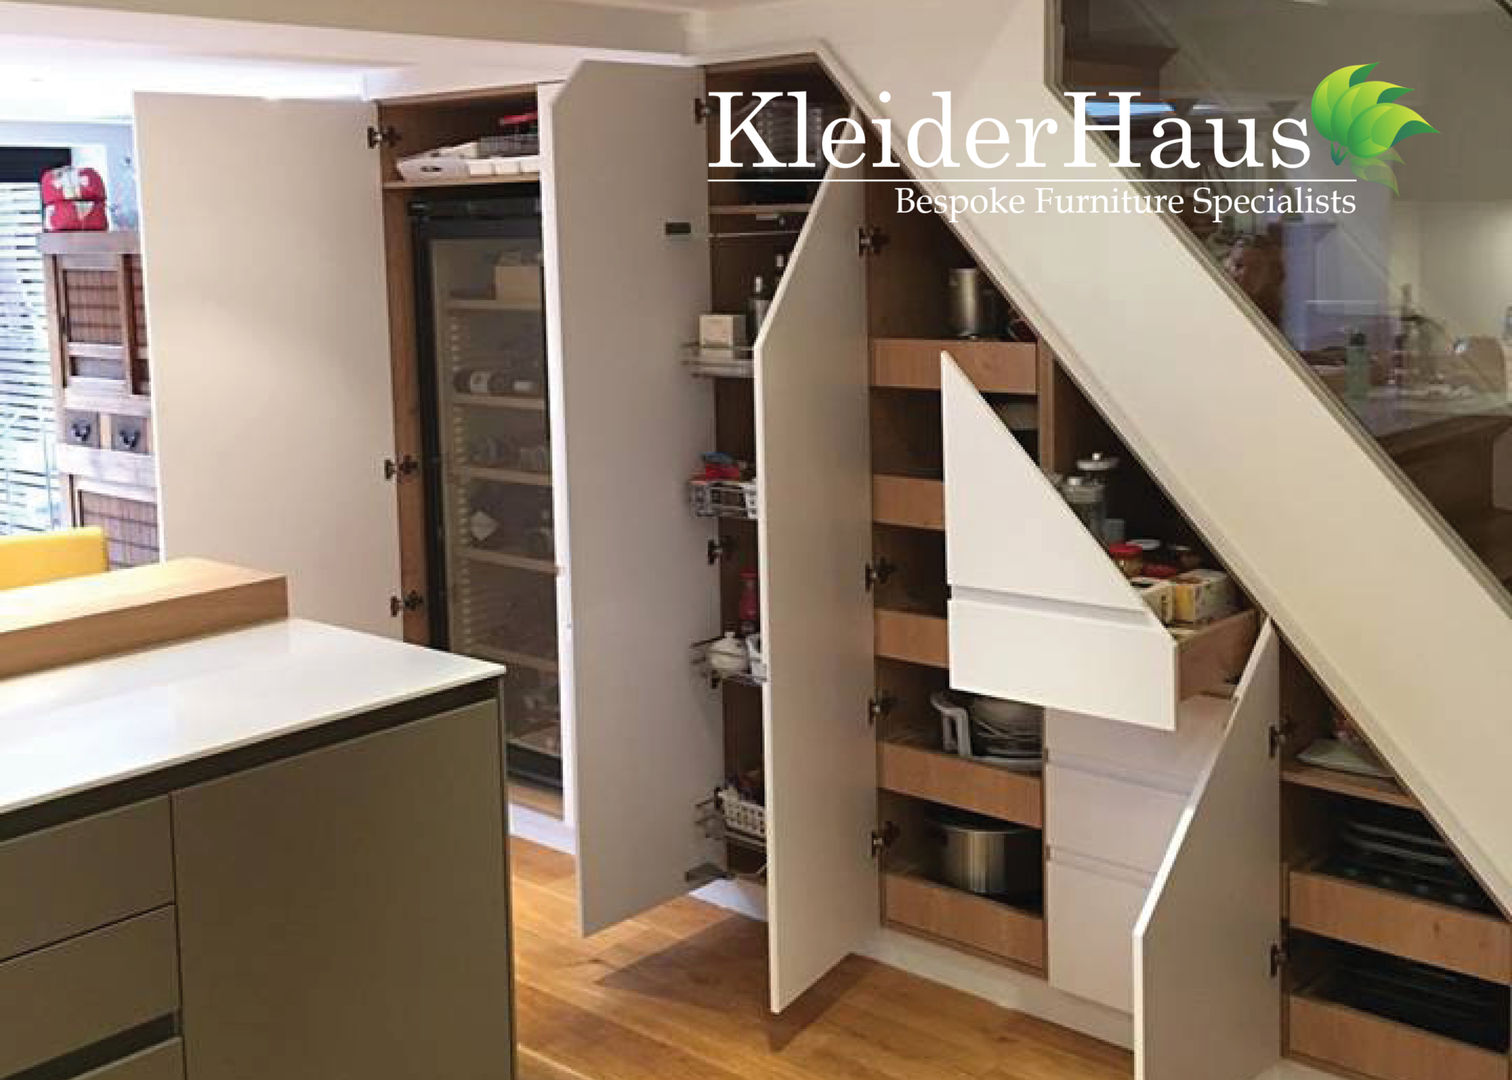 Kitchen Understairs unit - Finally project Completed by Kleiderhaus Kleiderhaus ltd مطبخ understairs,kitchen understairs,kitchen,fitted kitchen,utility,made to measure,awkward space,bespoke kitchen,joinery,kitchen remodeling,custom made,under-stairs